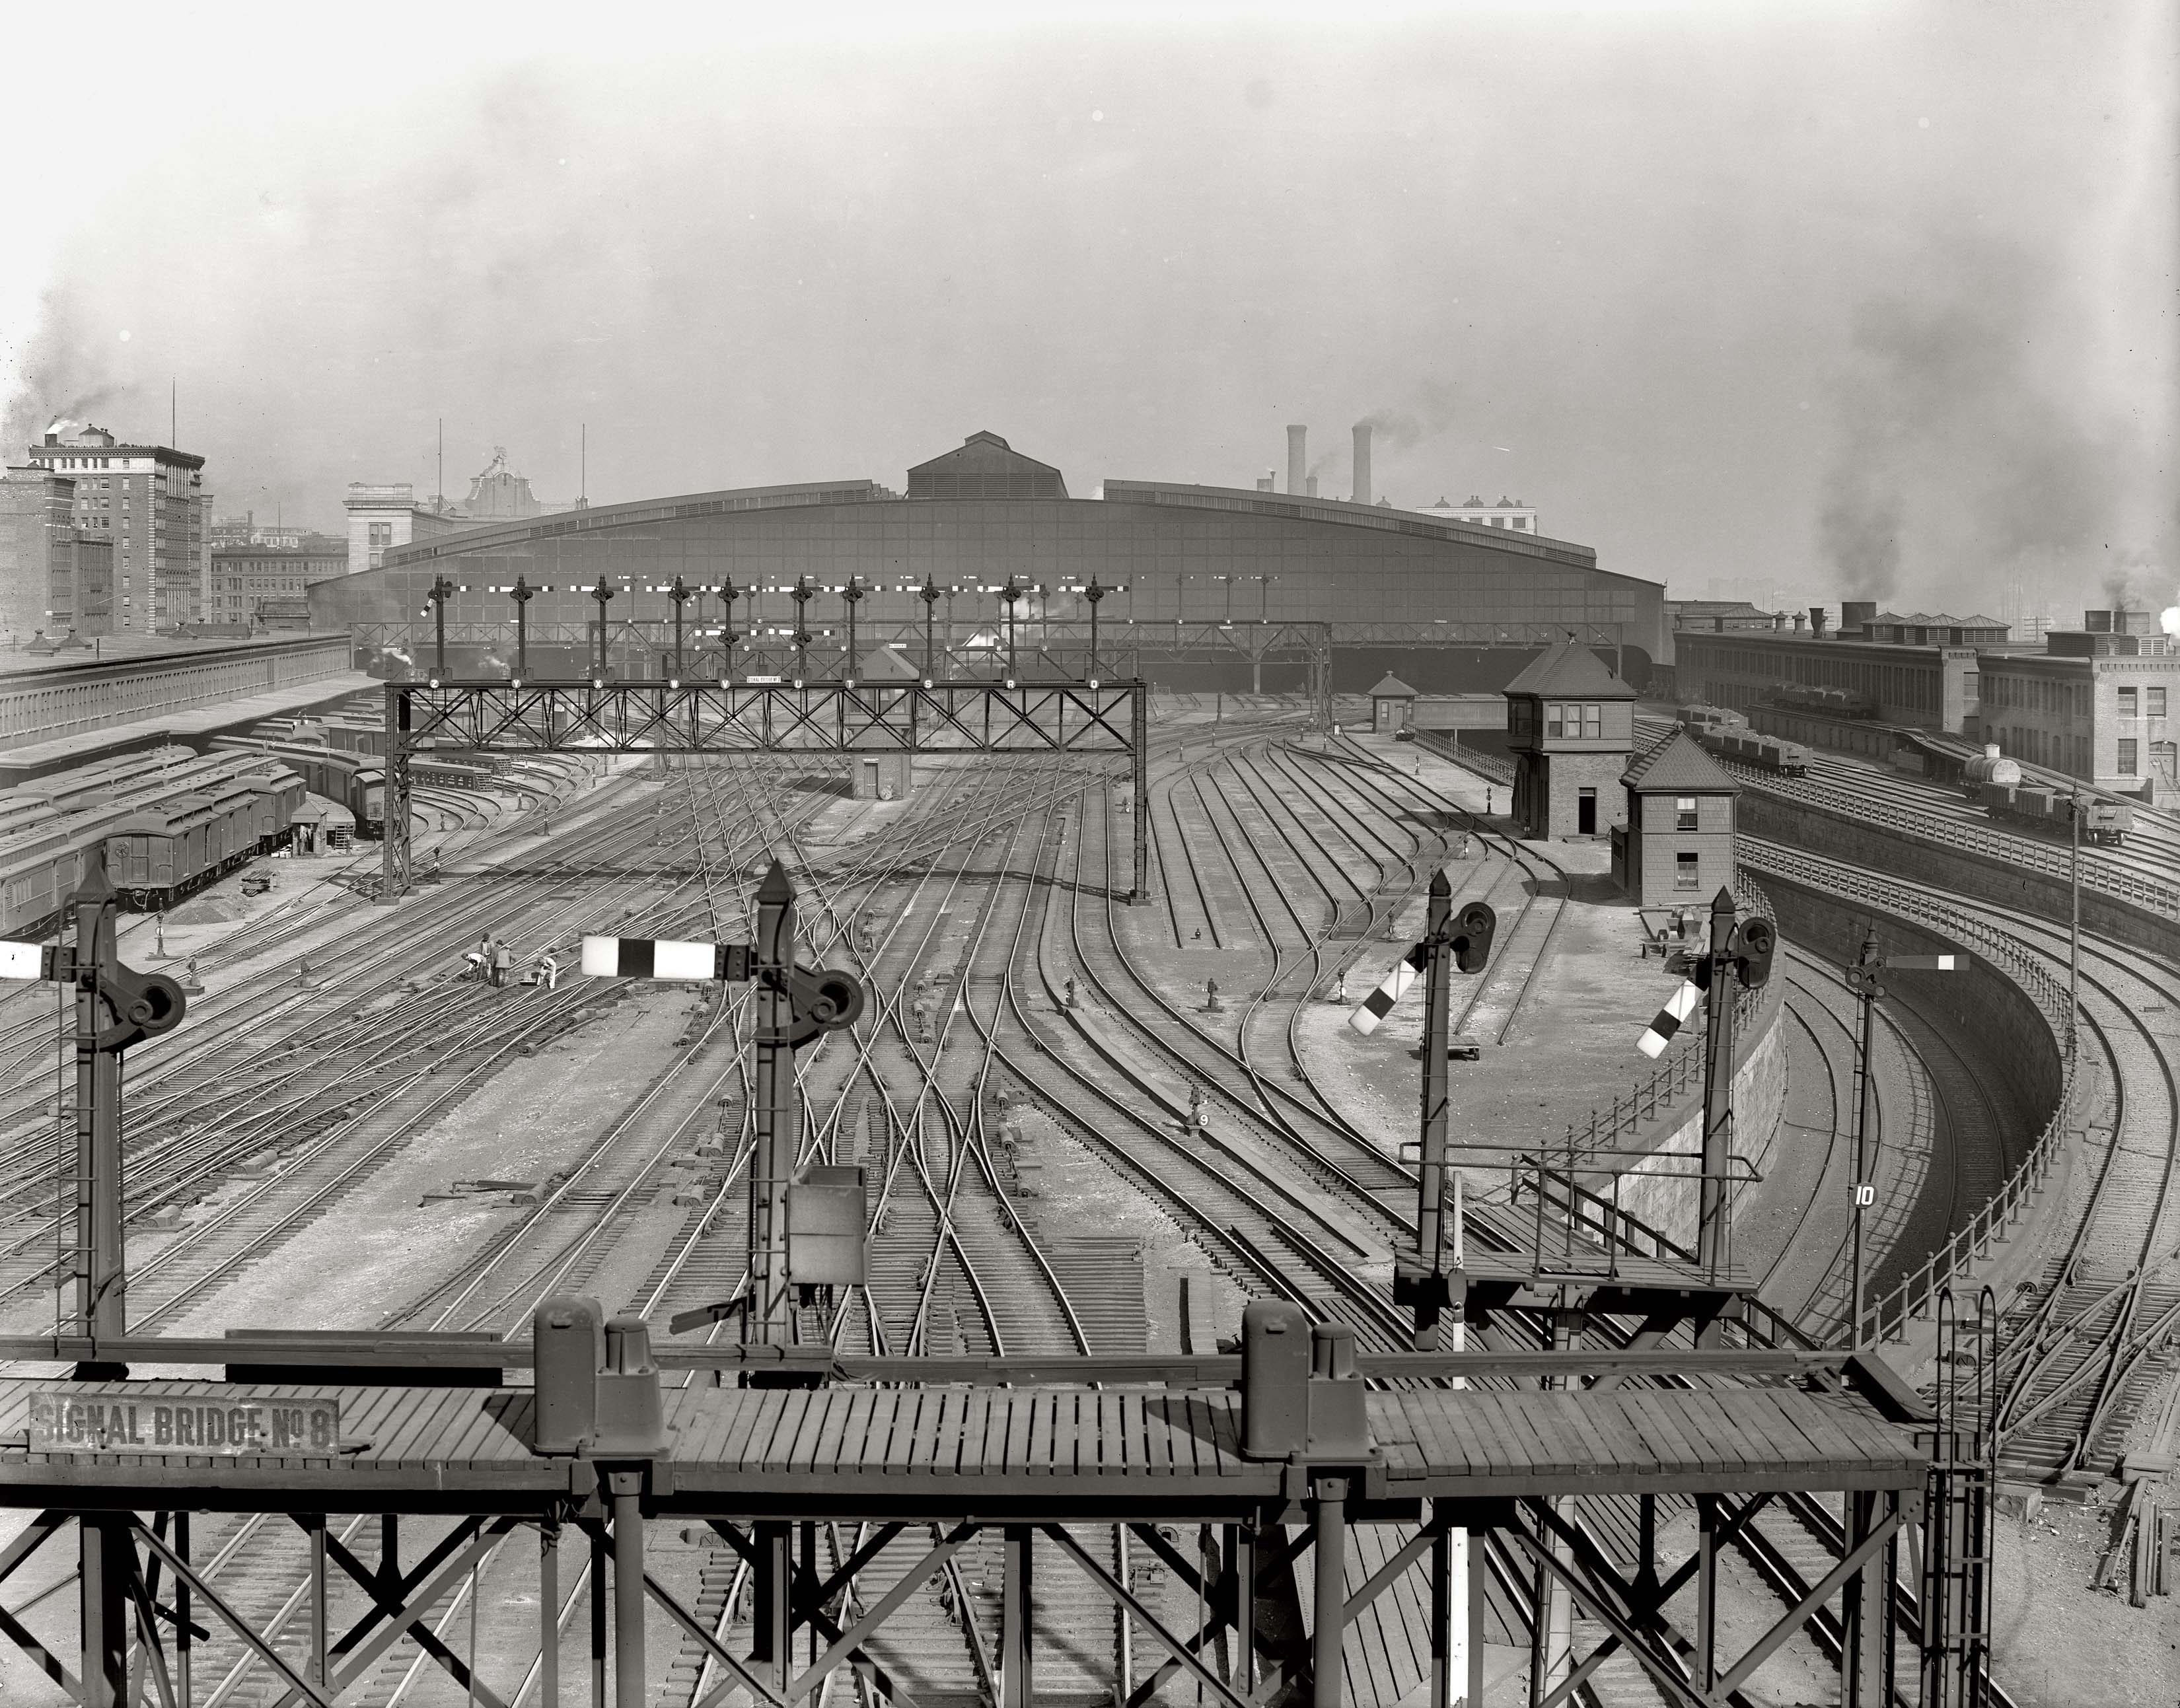 Image of Yards and Tracks, South Terminal Stations, Boston, Mass.